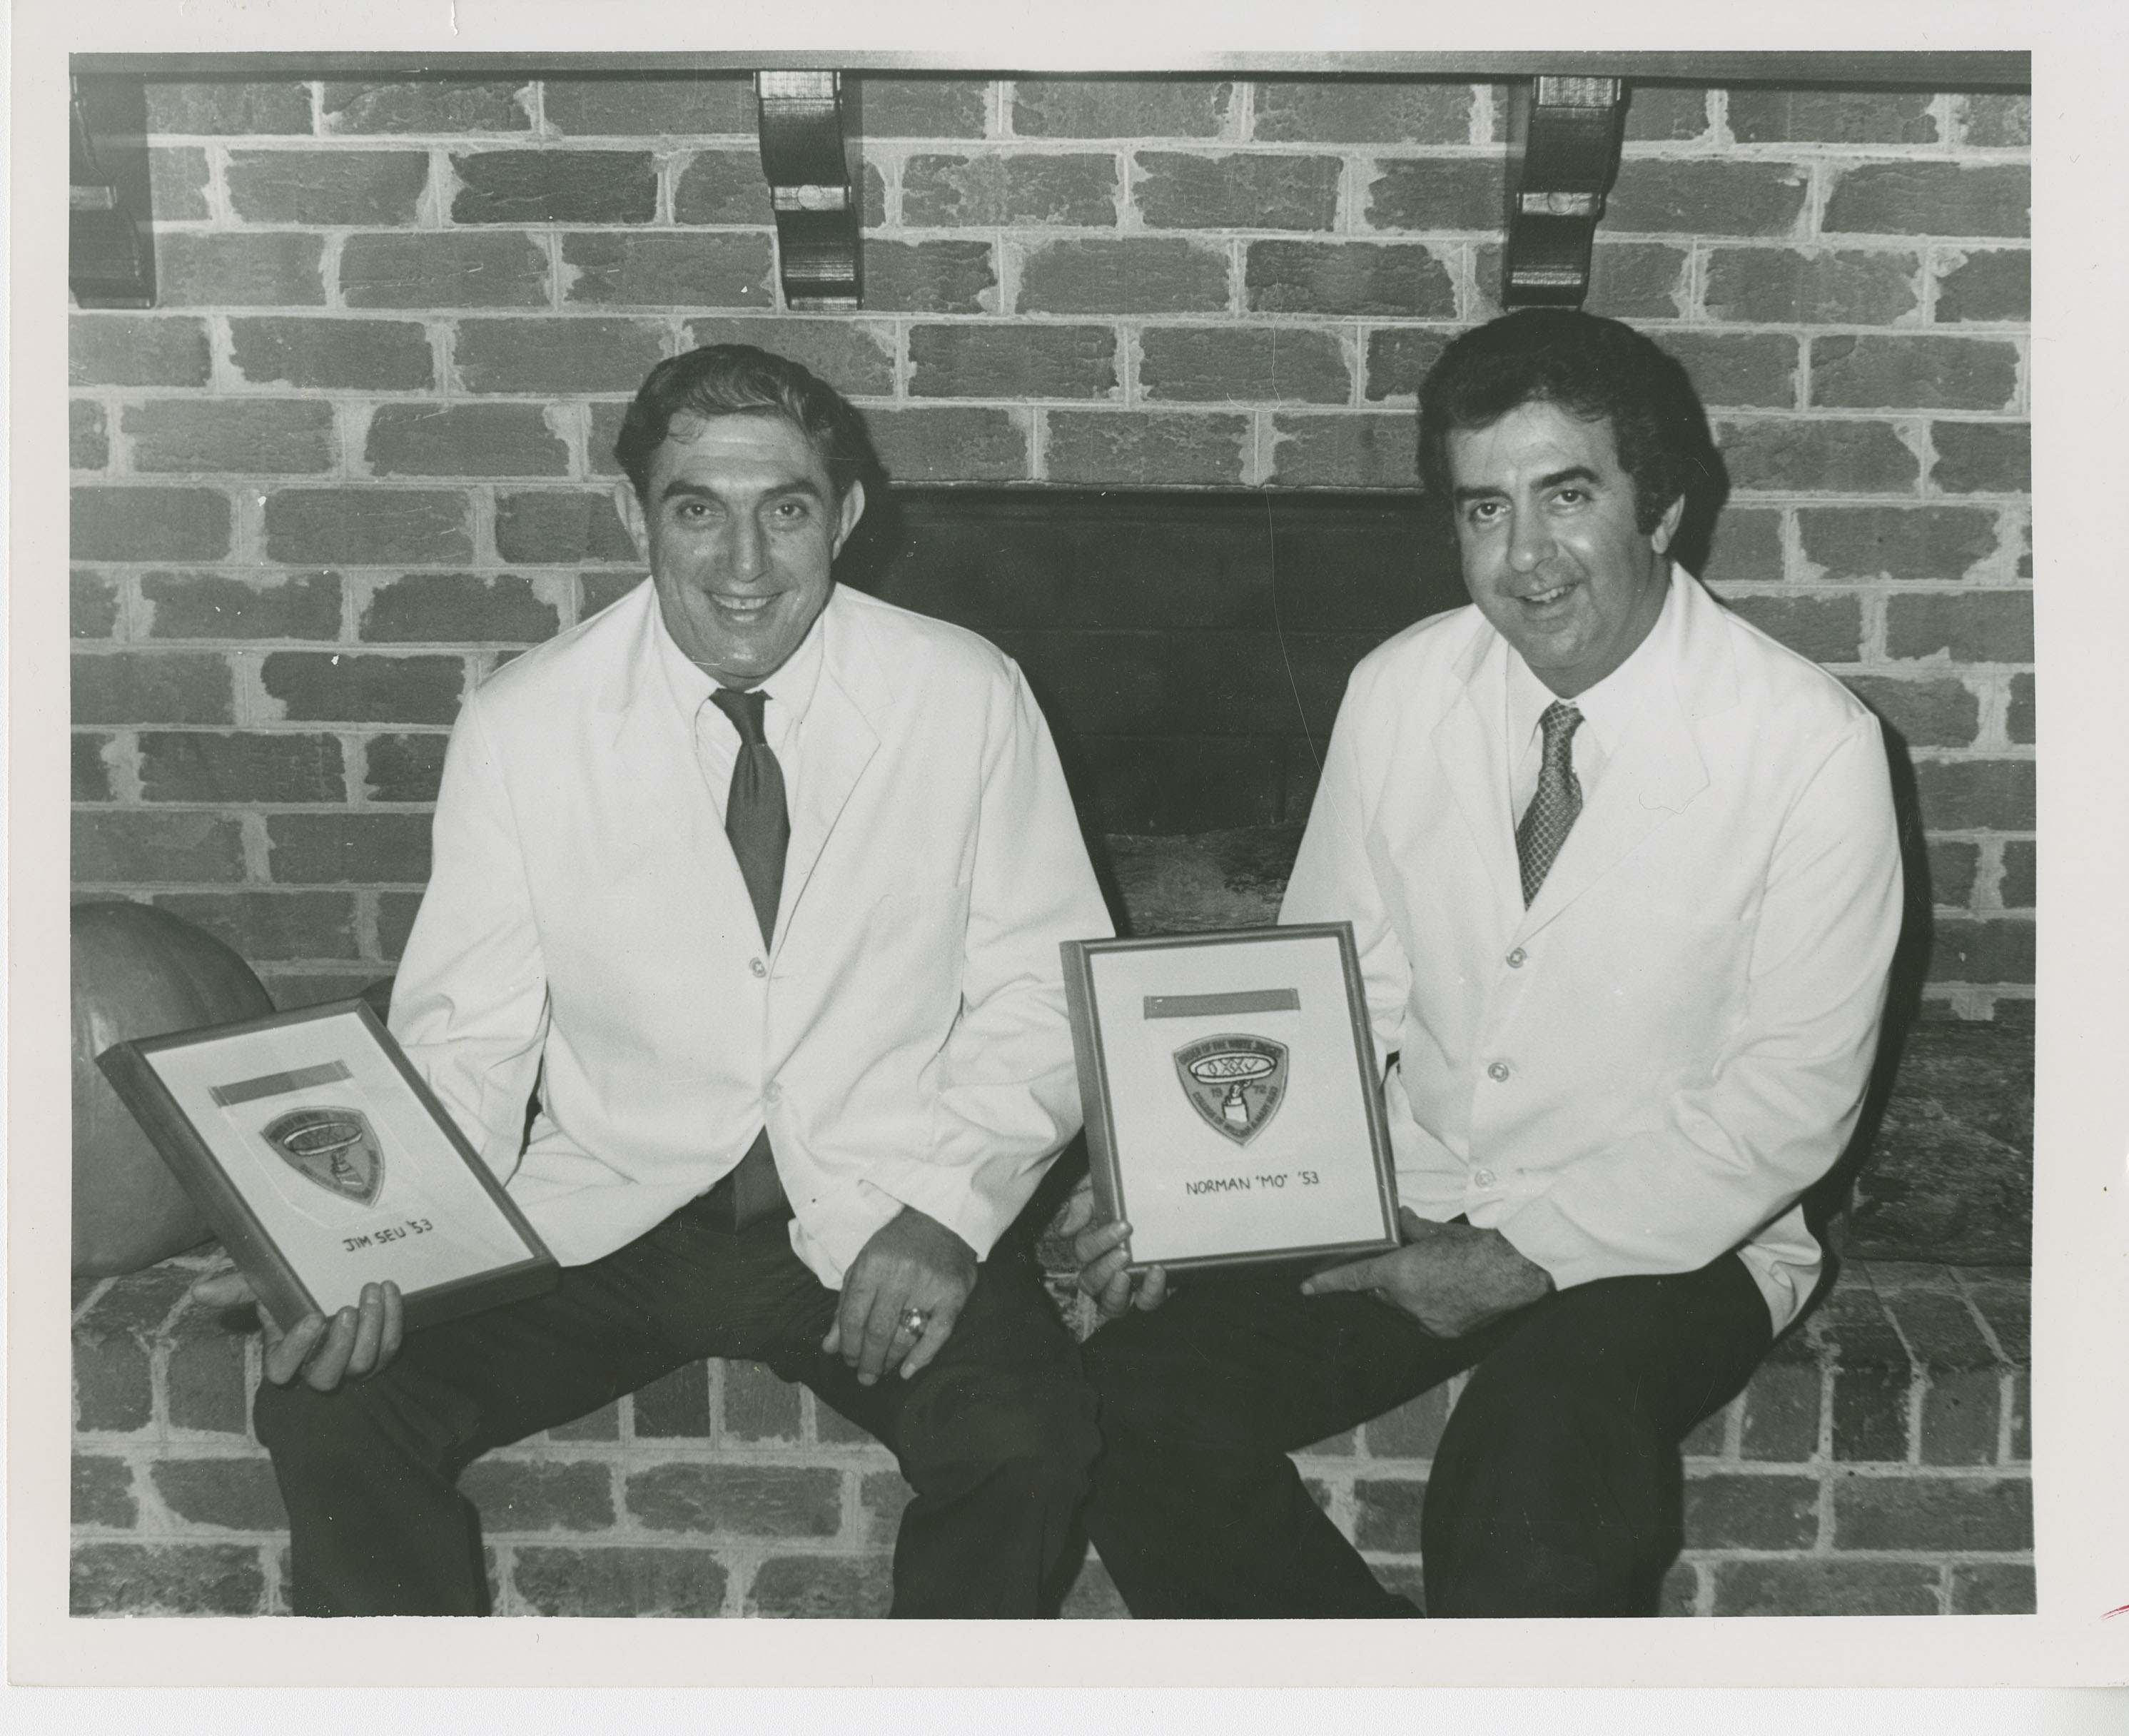 Photograph of Jim Seu and Norman Moomjian seated in front of a brick fireplace, each holding an award